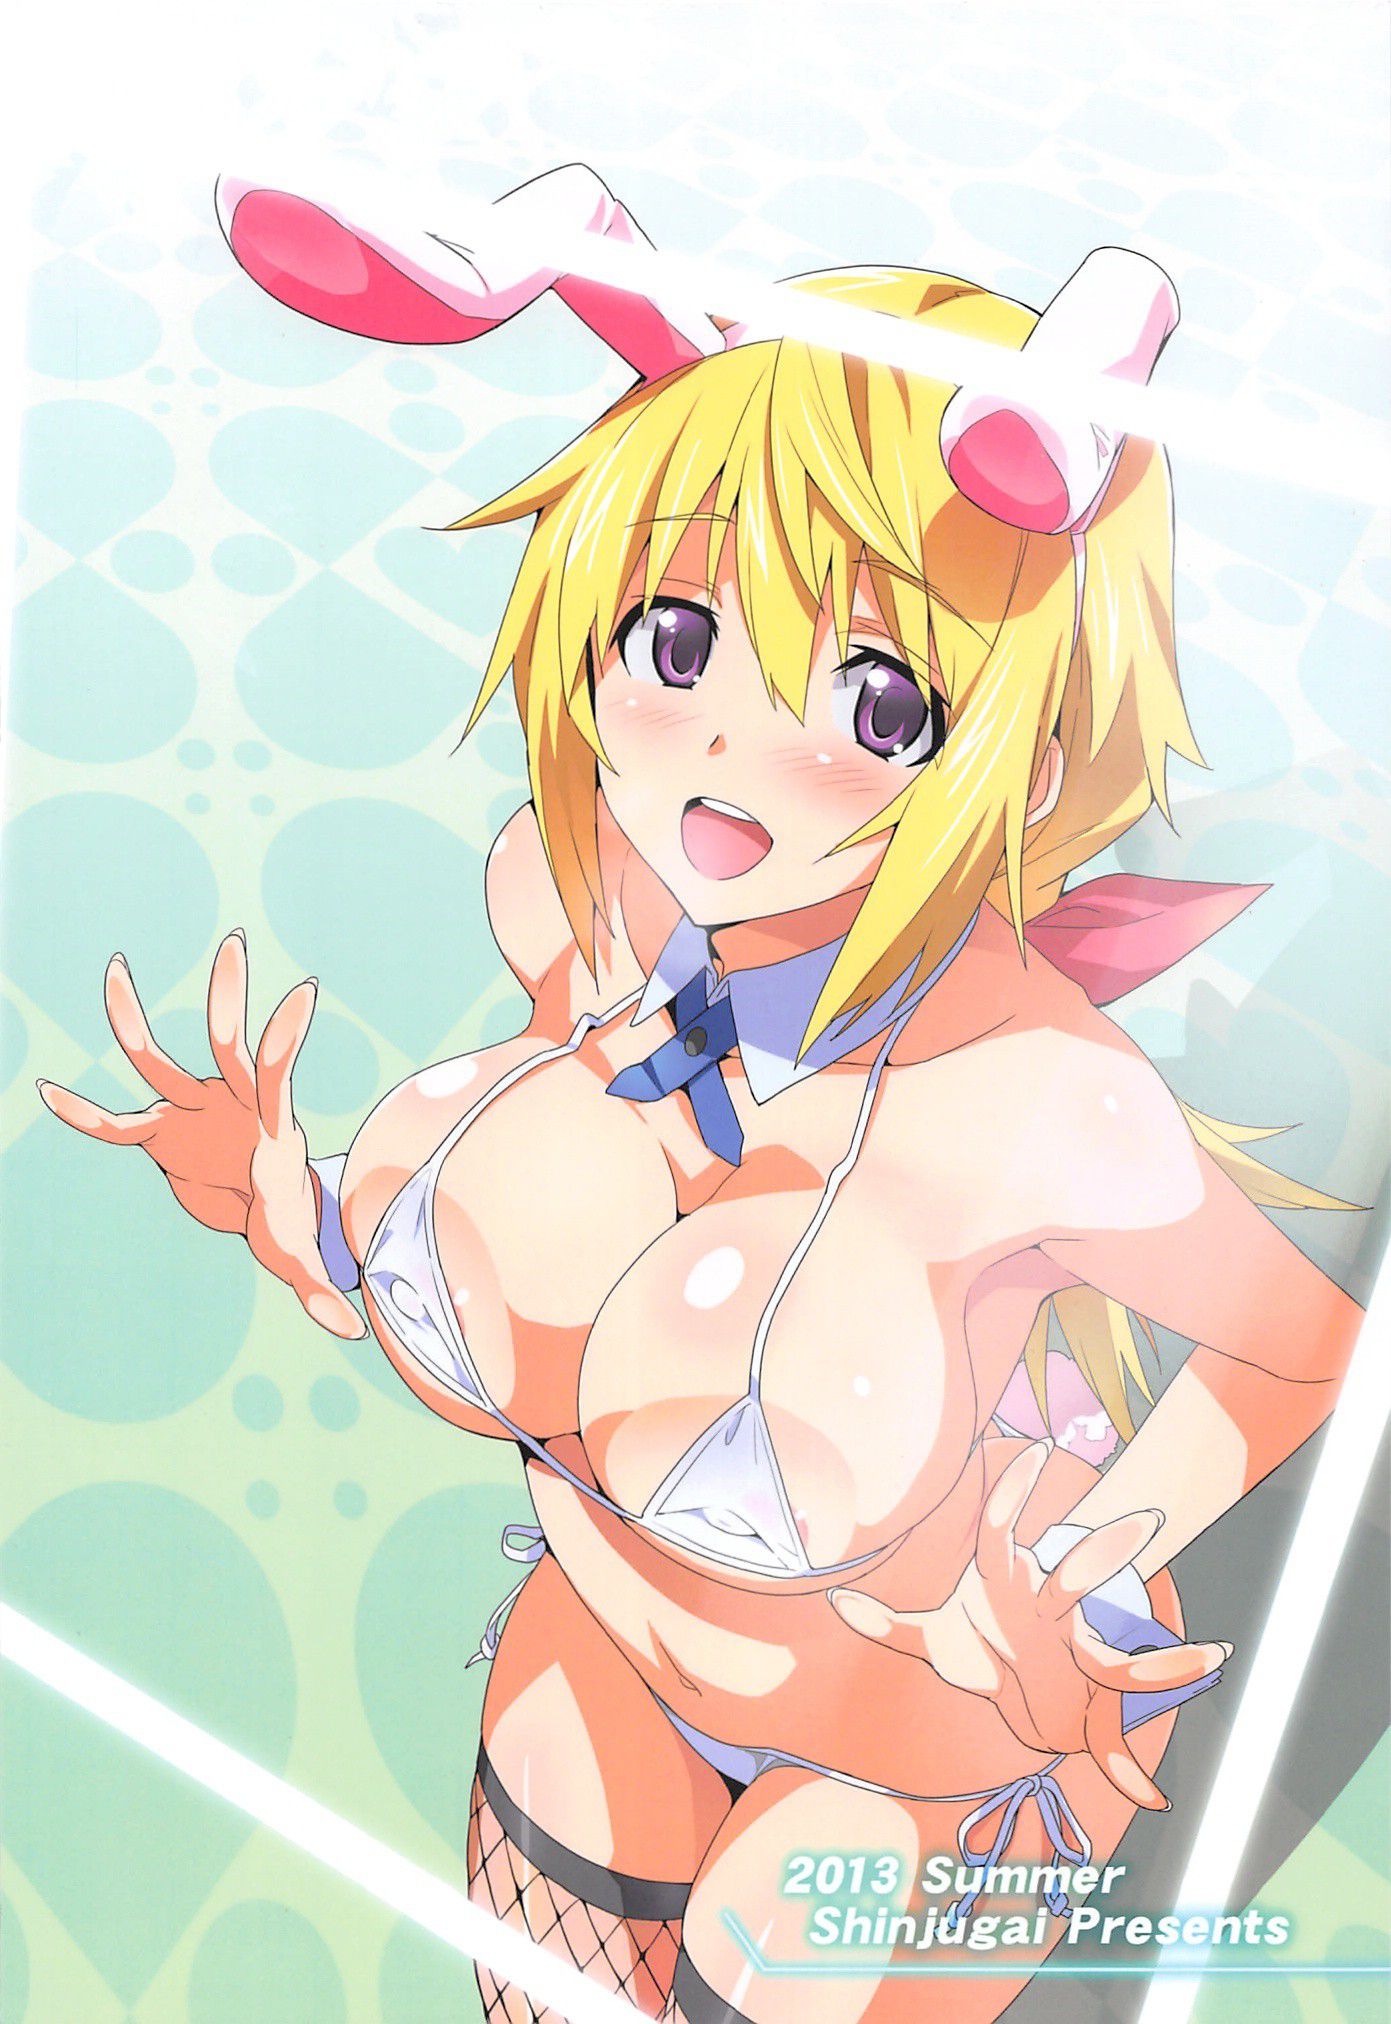 Those clothes that the how bad スケベ could be of the bunny is abnormal what 10